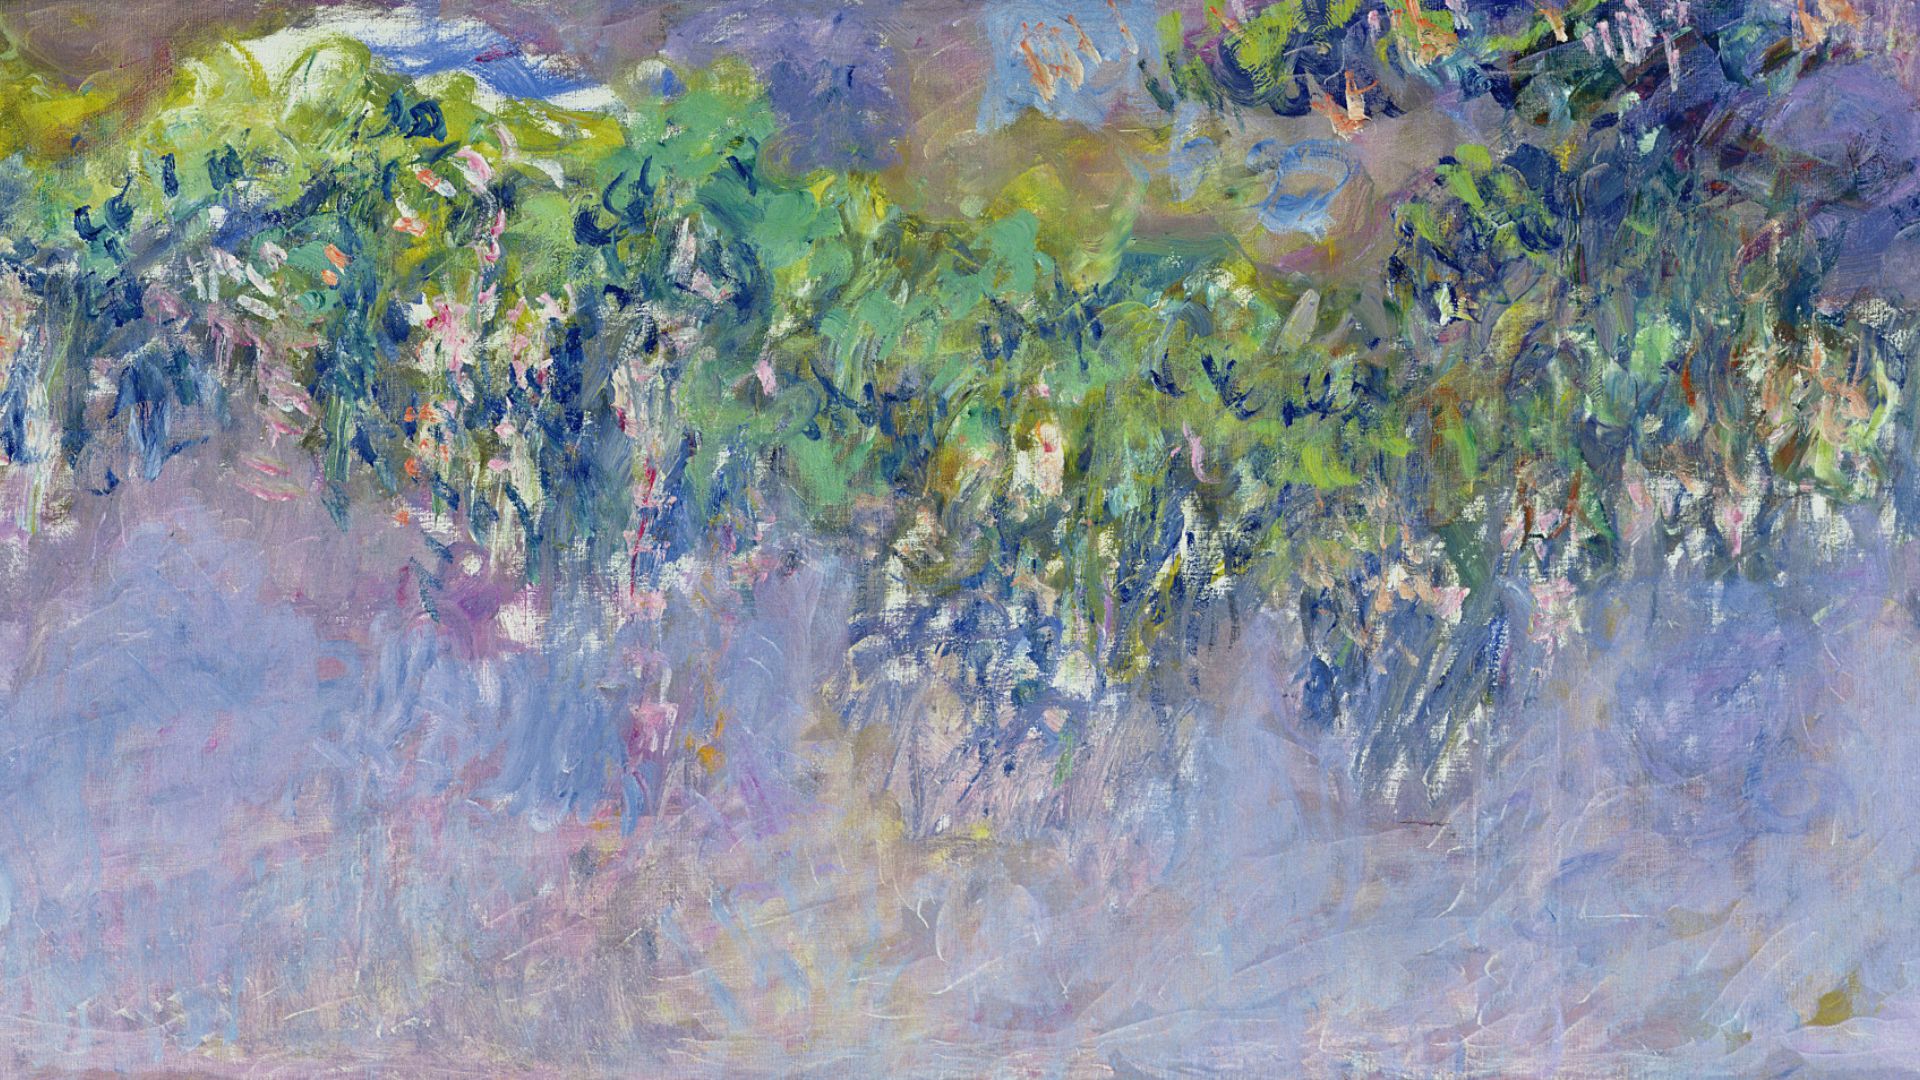 Wisteria by Claude Monet is on view at the Saint Louis Art Museum.